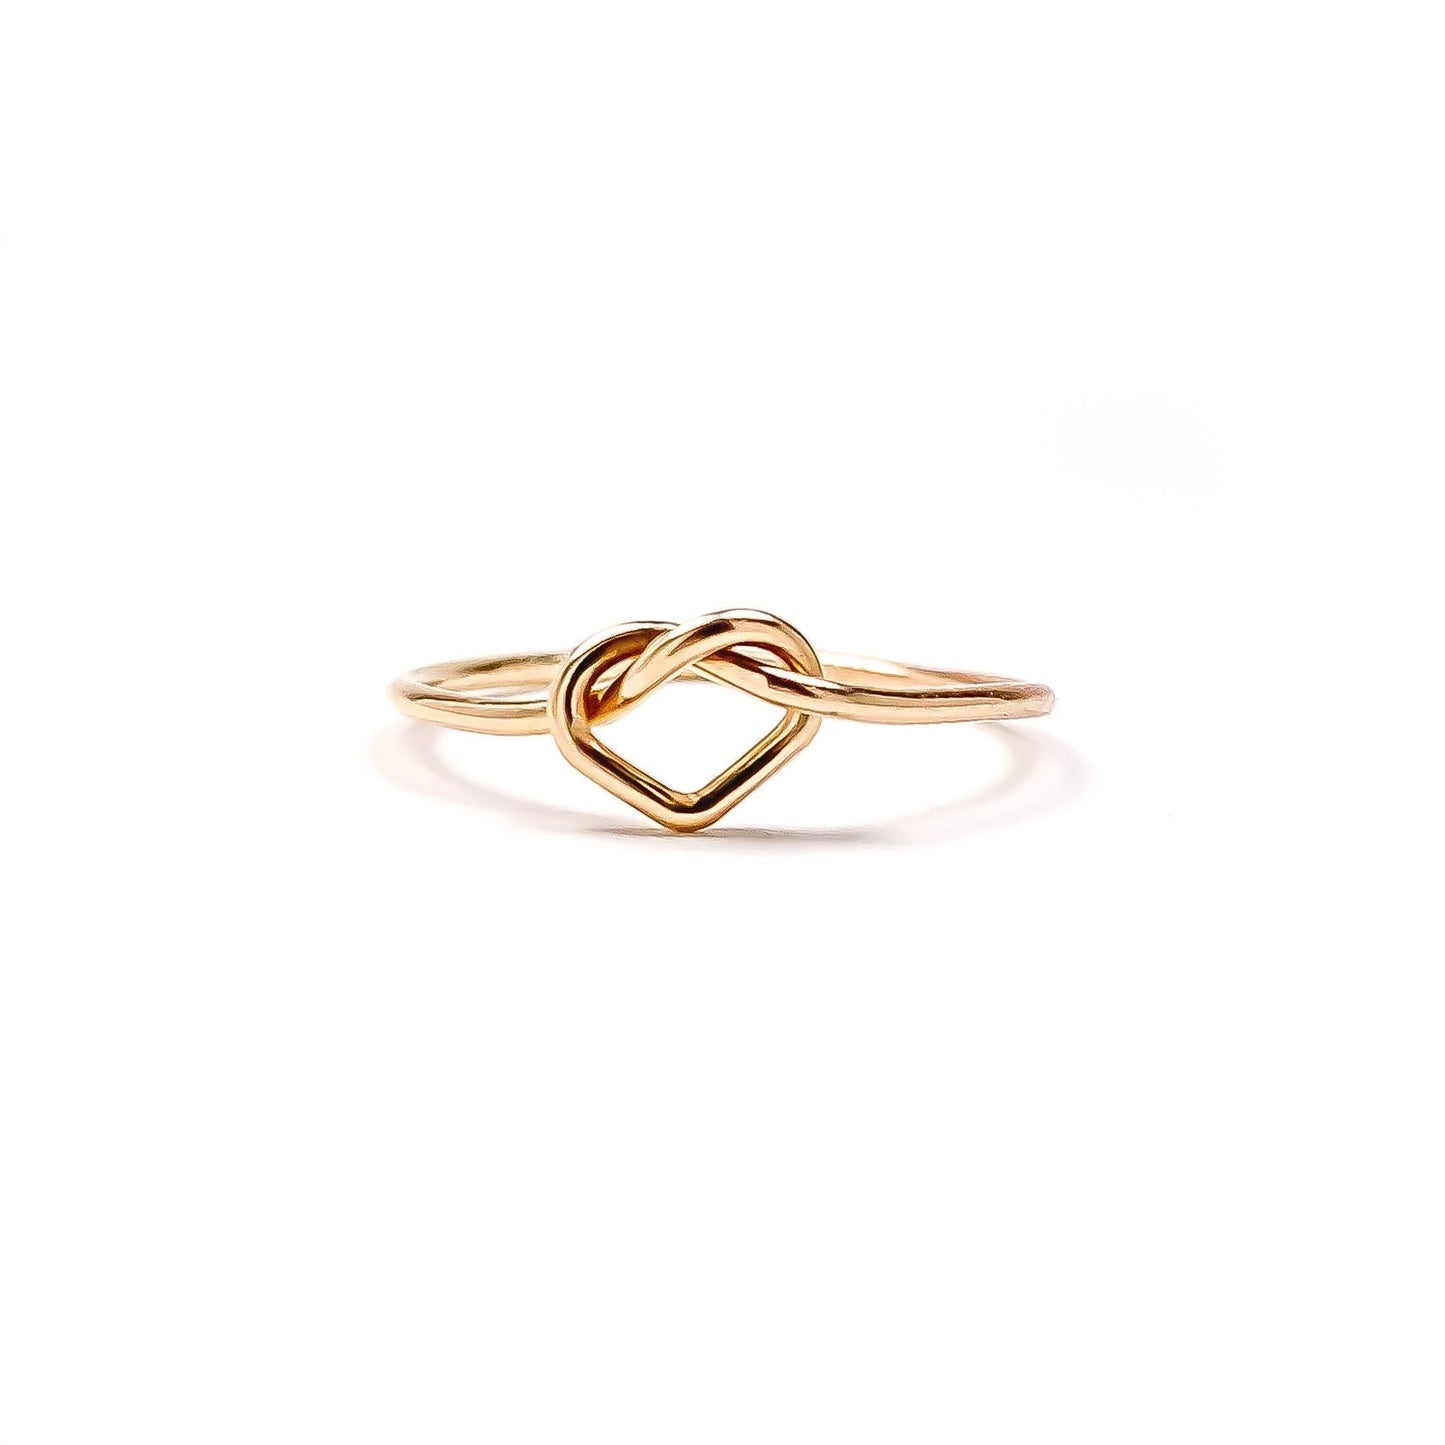 Heart Knot Ring, 14K Gold Filled